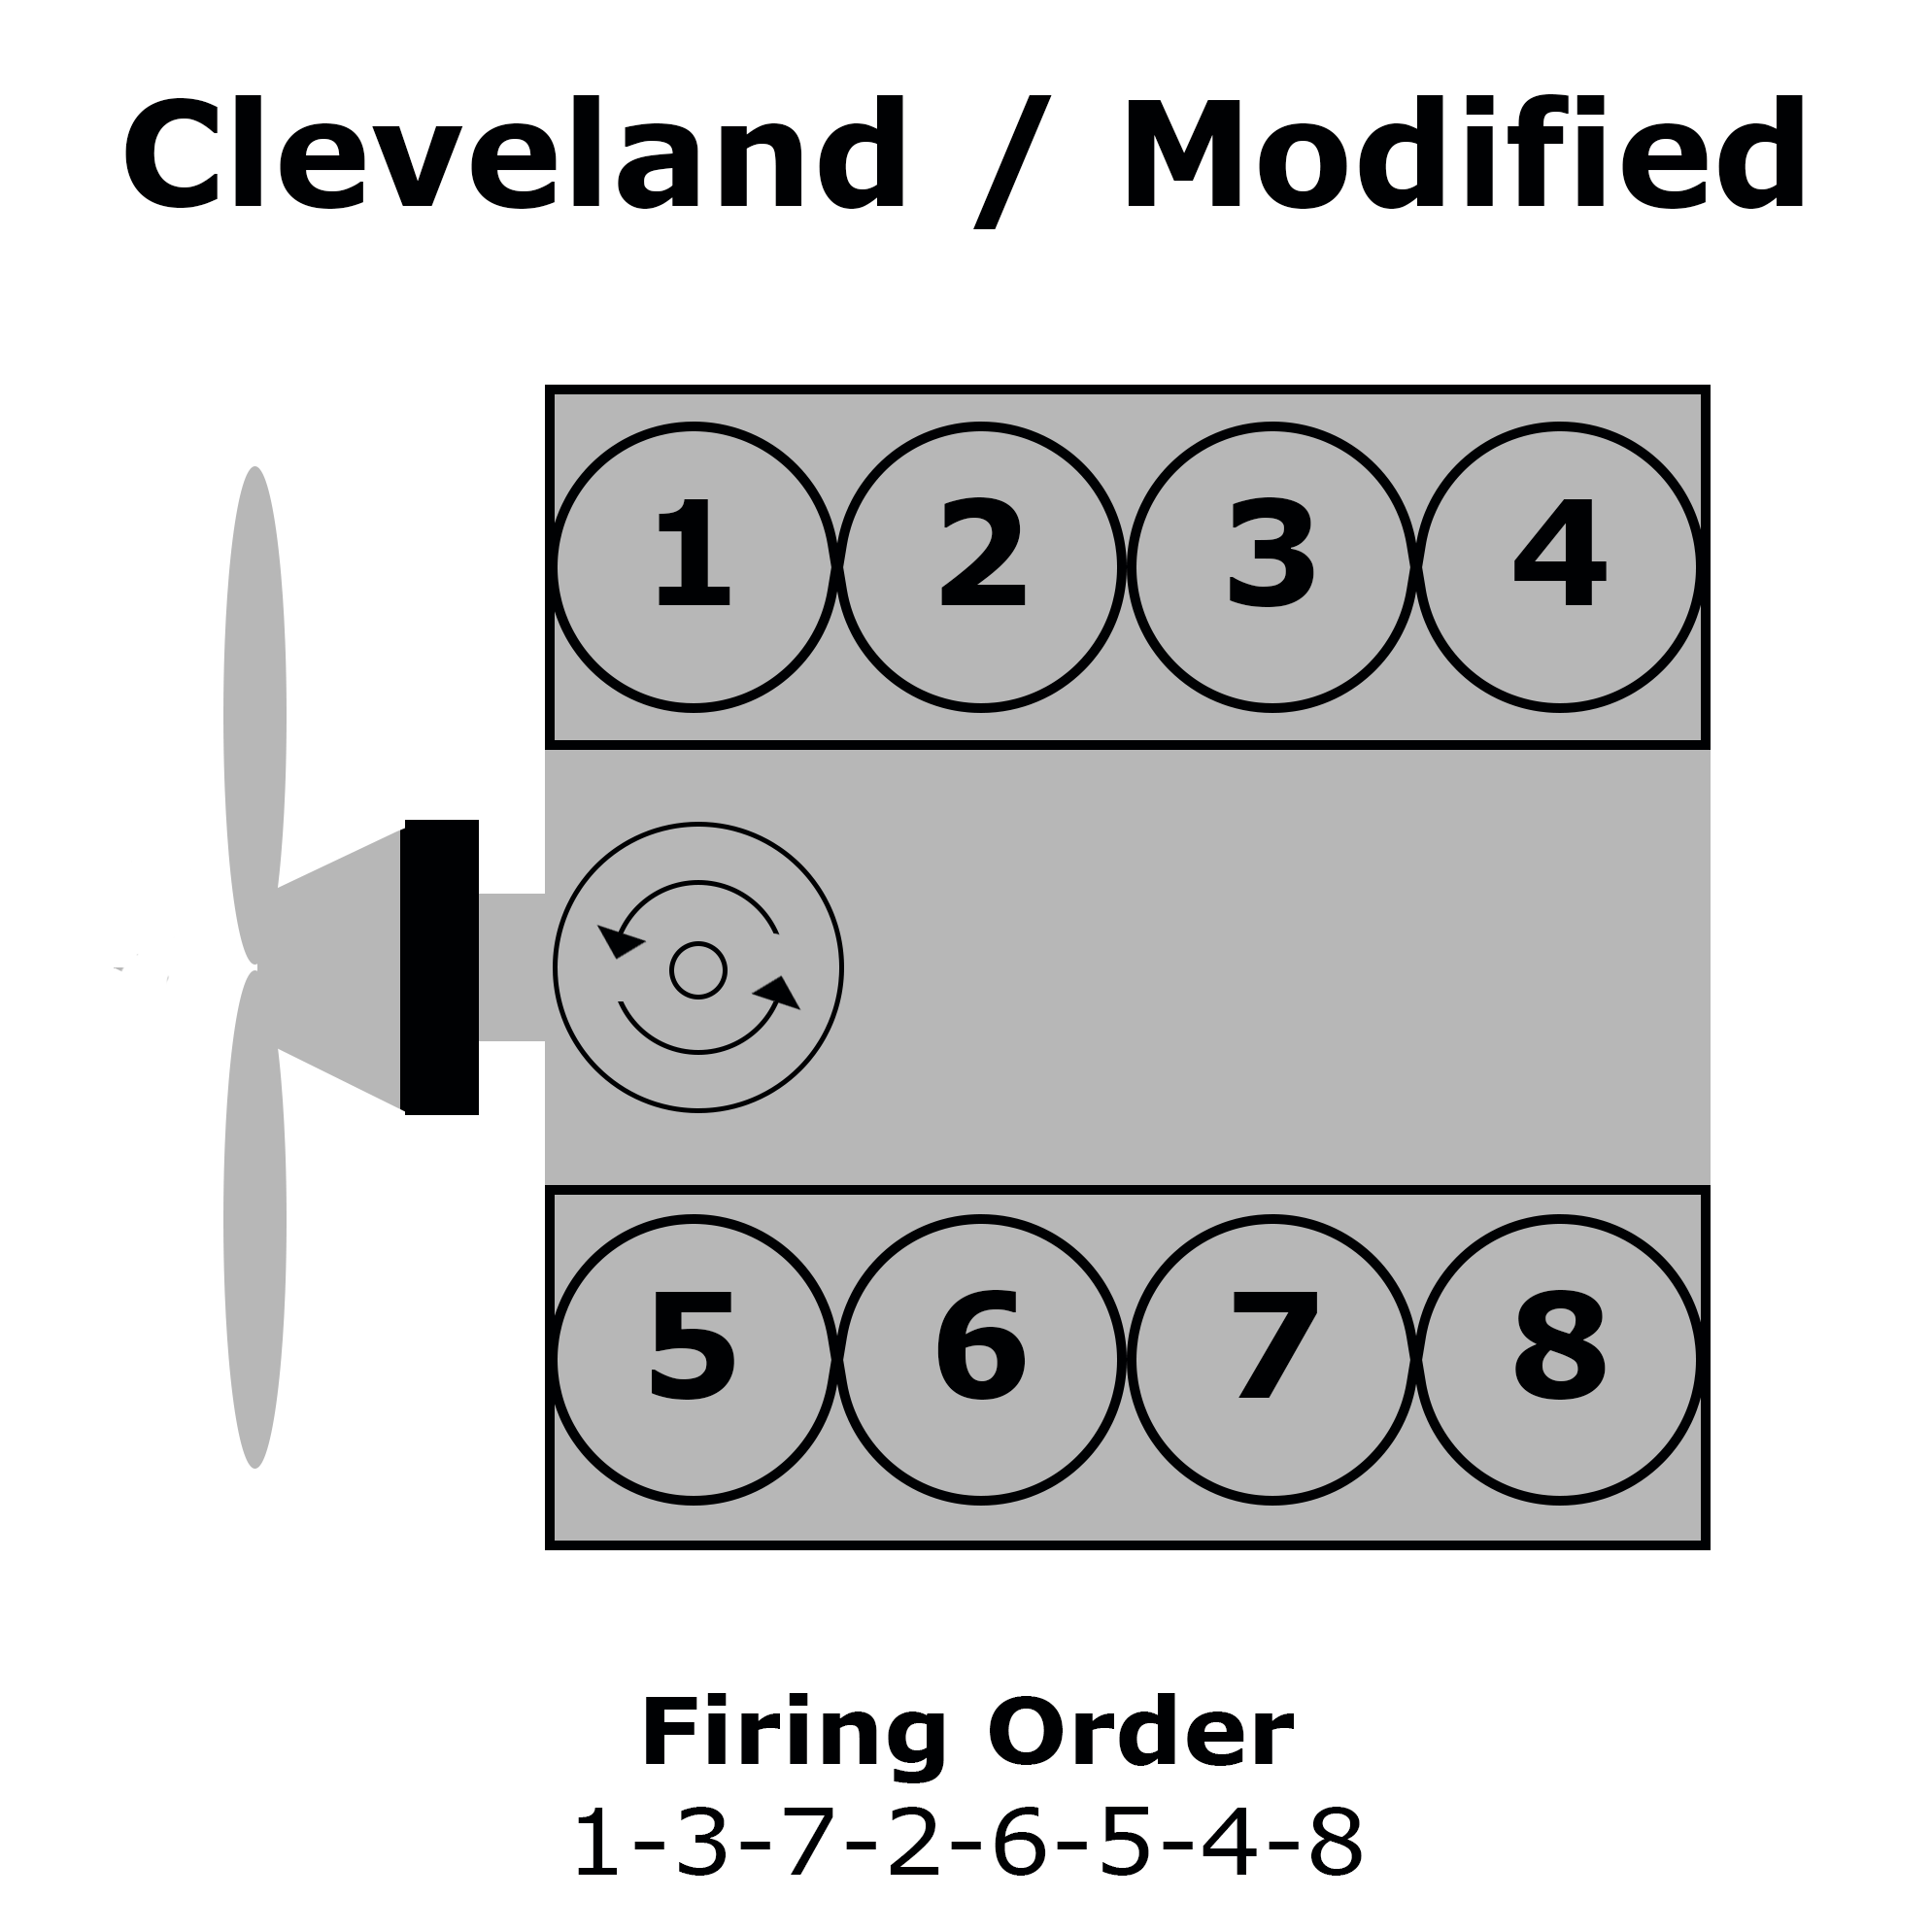 Ford Cleveland & Modified Cylinder Numbering, Distributor Rotation, and Firing Order